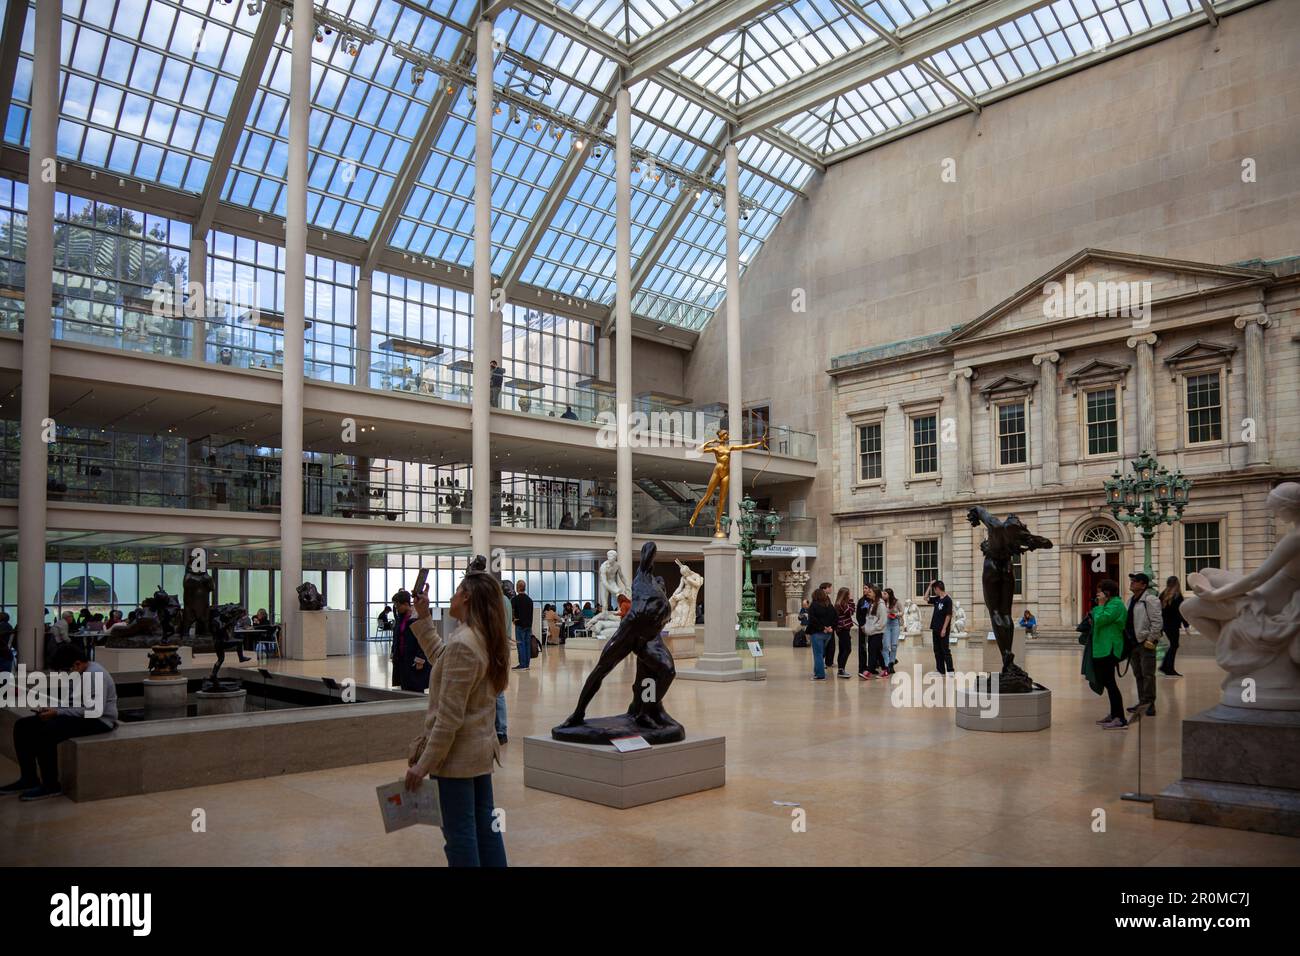 The American Wing Atrium at the Metropolitan Museum in New York, USA Stock Photo